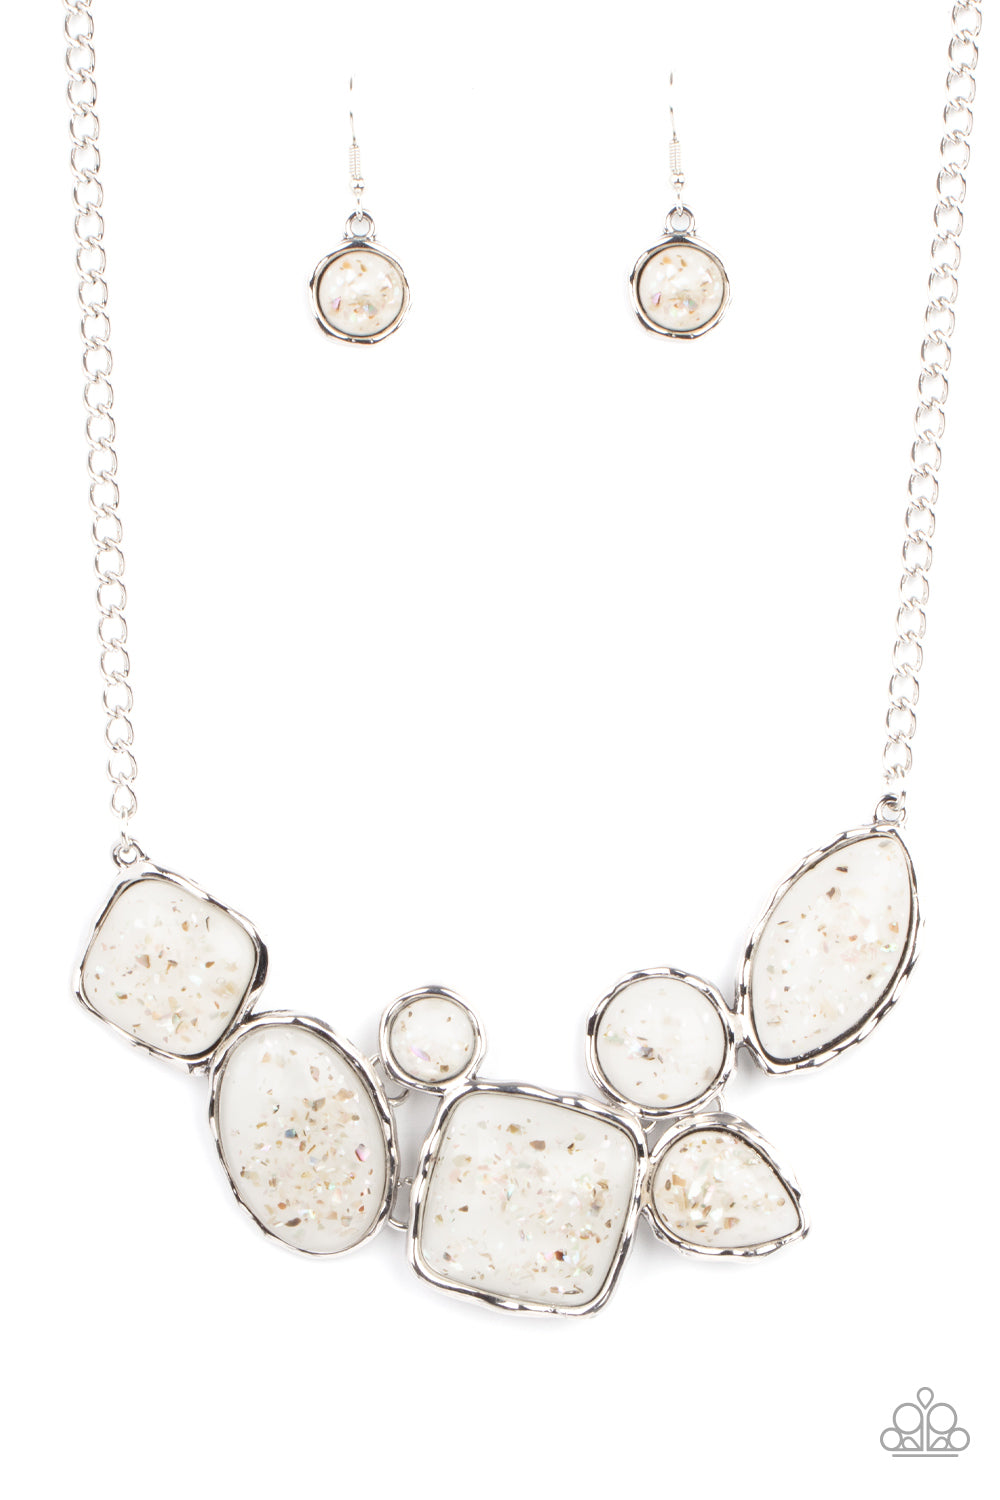 So Jelly White Necklace - Paparazzi Accessories  Flecks of iridescent shell-like pieces are encased in glassy white beads. Featuring hammered silver frames, the mismatched frames delicately cluster below the collar for an ethereal fashion. Features an adjustable clasp closure.  All Paparazzi Accessories are lead free and nickel free!  Sold as one individual necklace. Includes one pair of matching earrings.